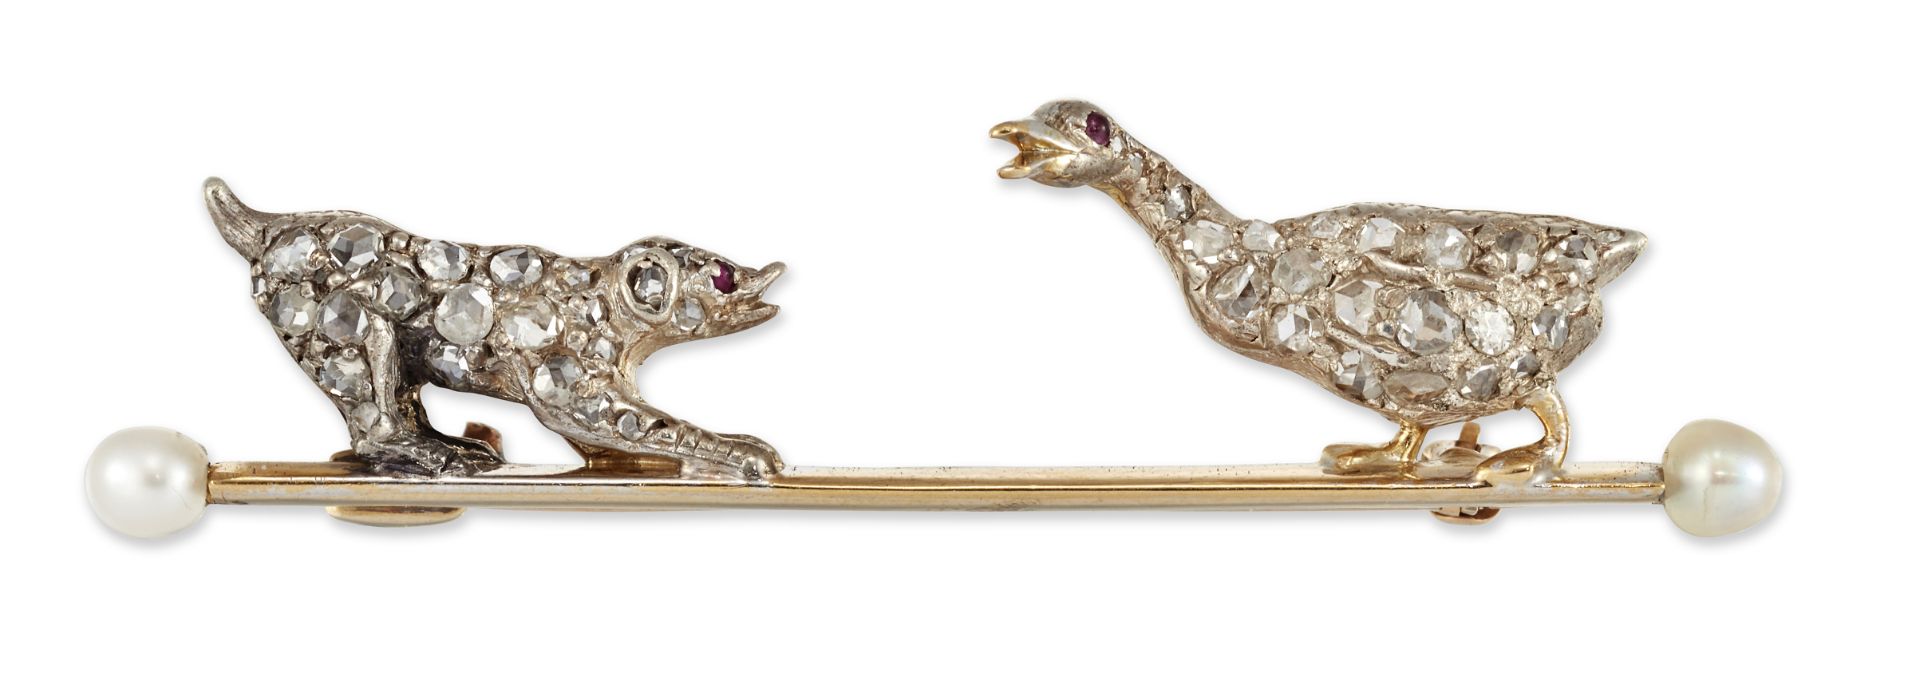 A 19TH CENTURY NOVELTY DIAMOND AND PEARL BROOCH